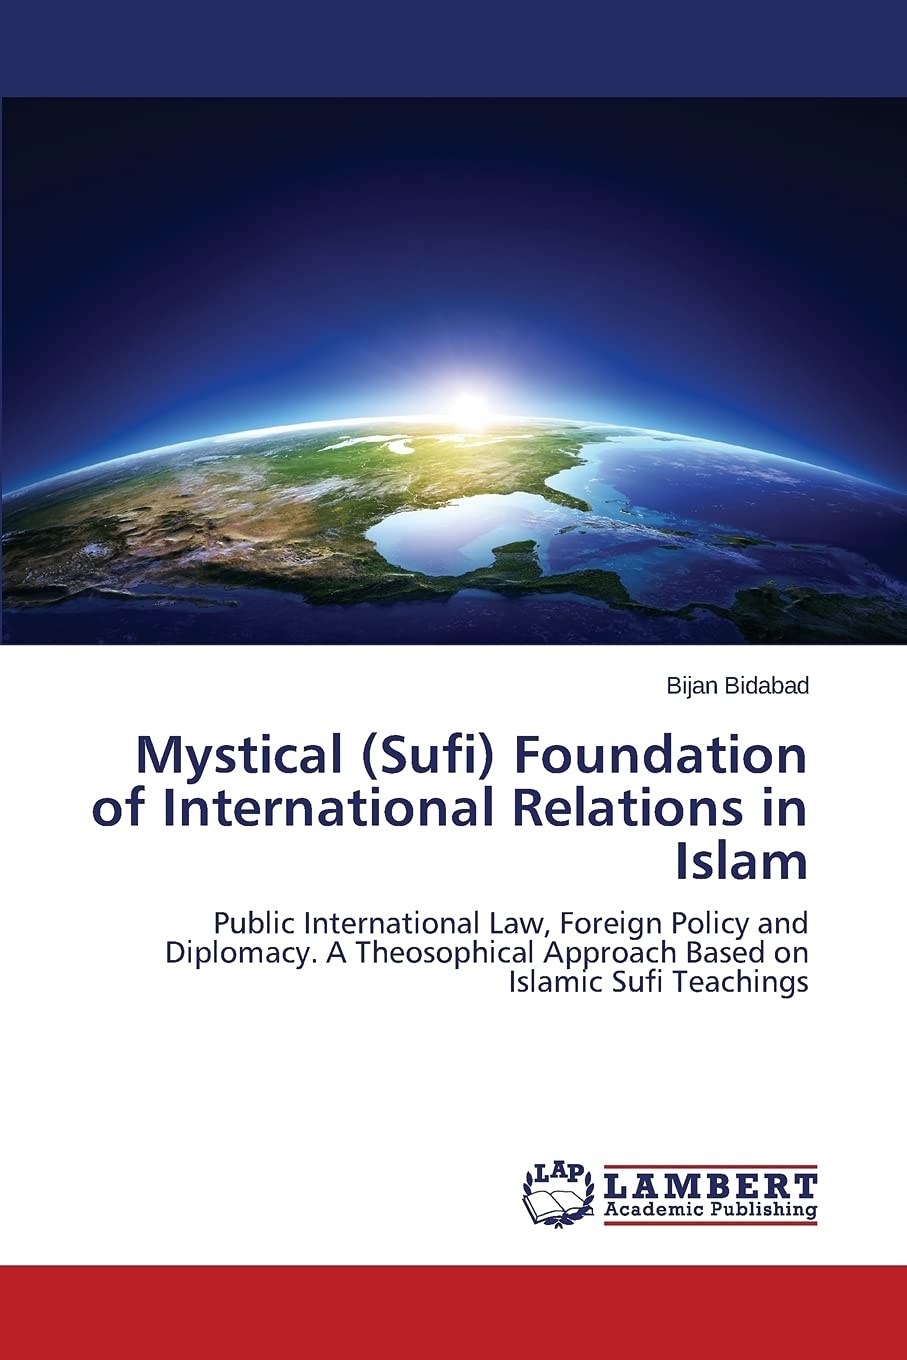 Mystical (Sufi) Foundation of International Relations in Islam, Public International Law, Foreign Policy and Diplomacy, a Theosophy Approach based on Islamic Sufi Teachings